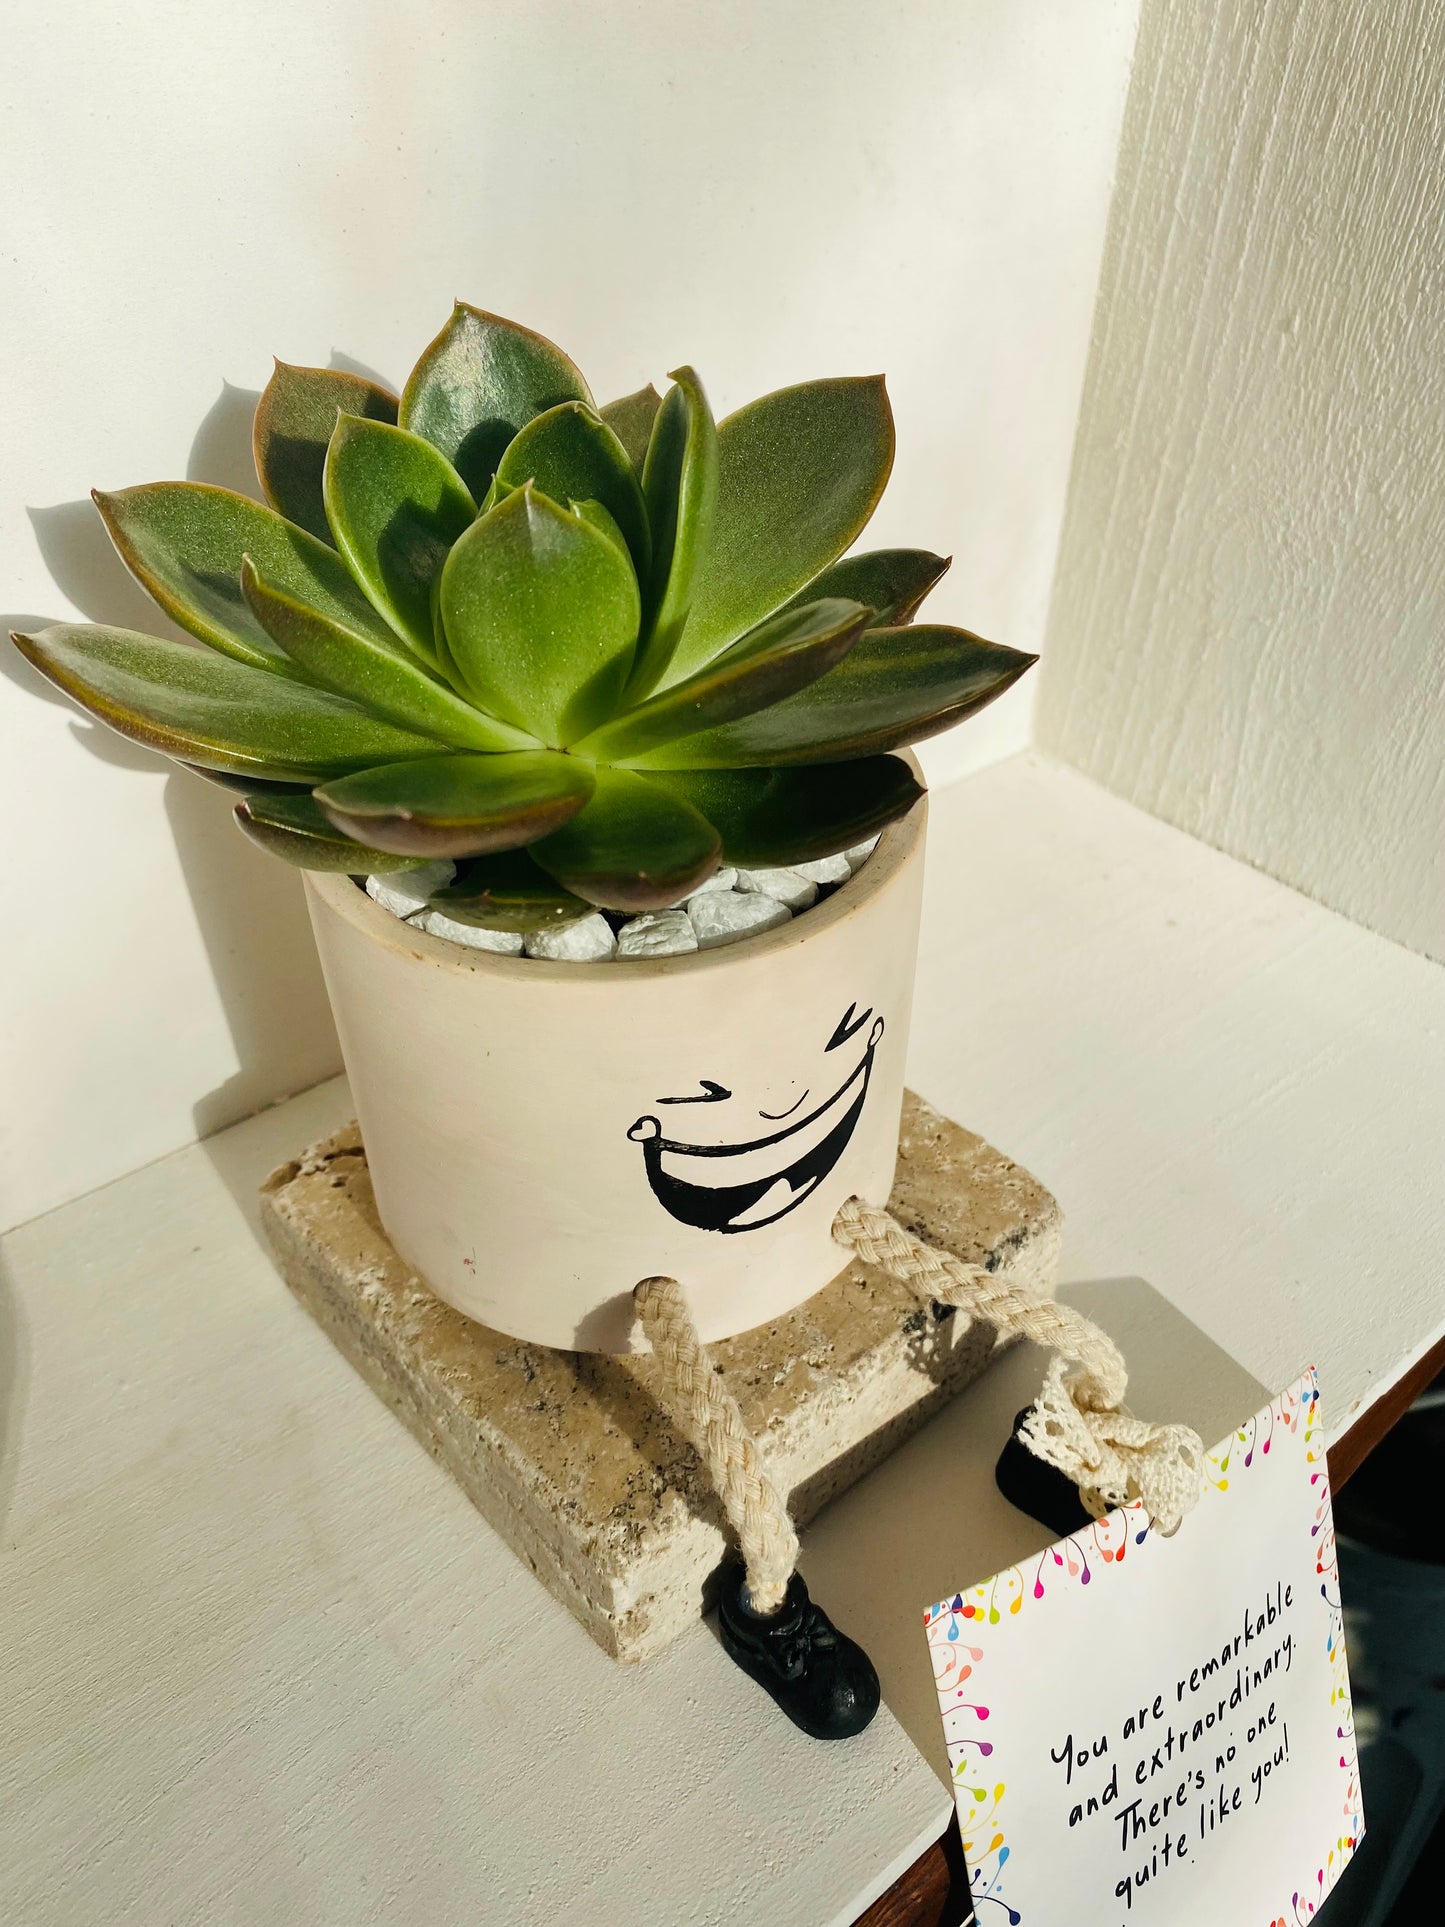 Green succulent with character face